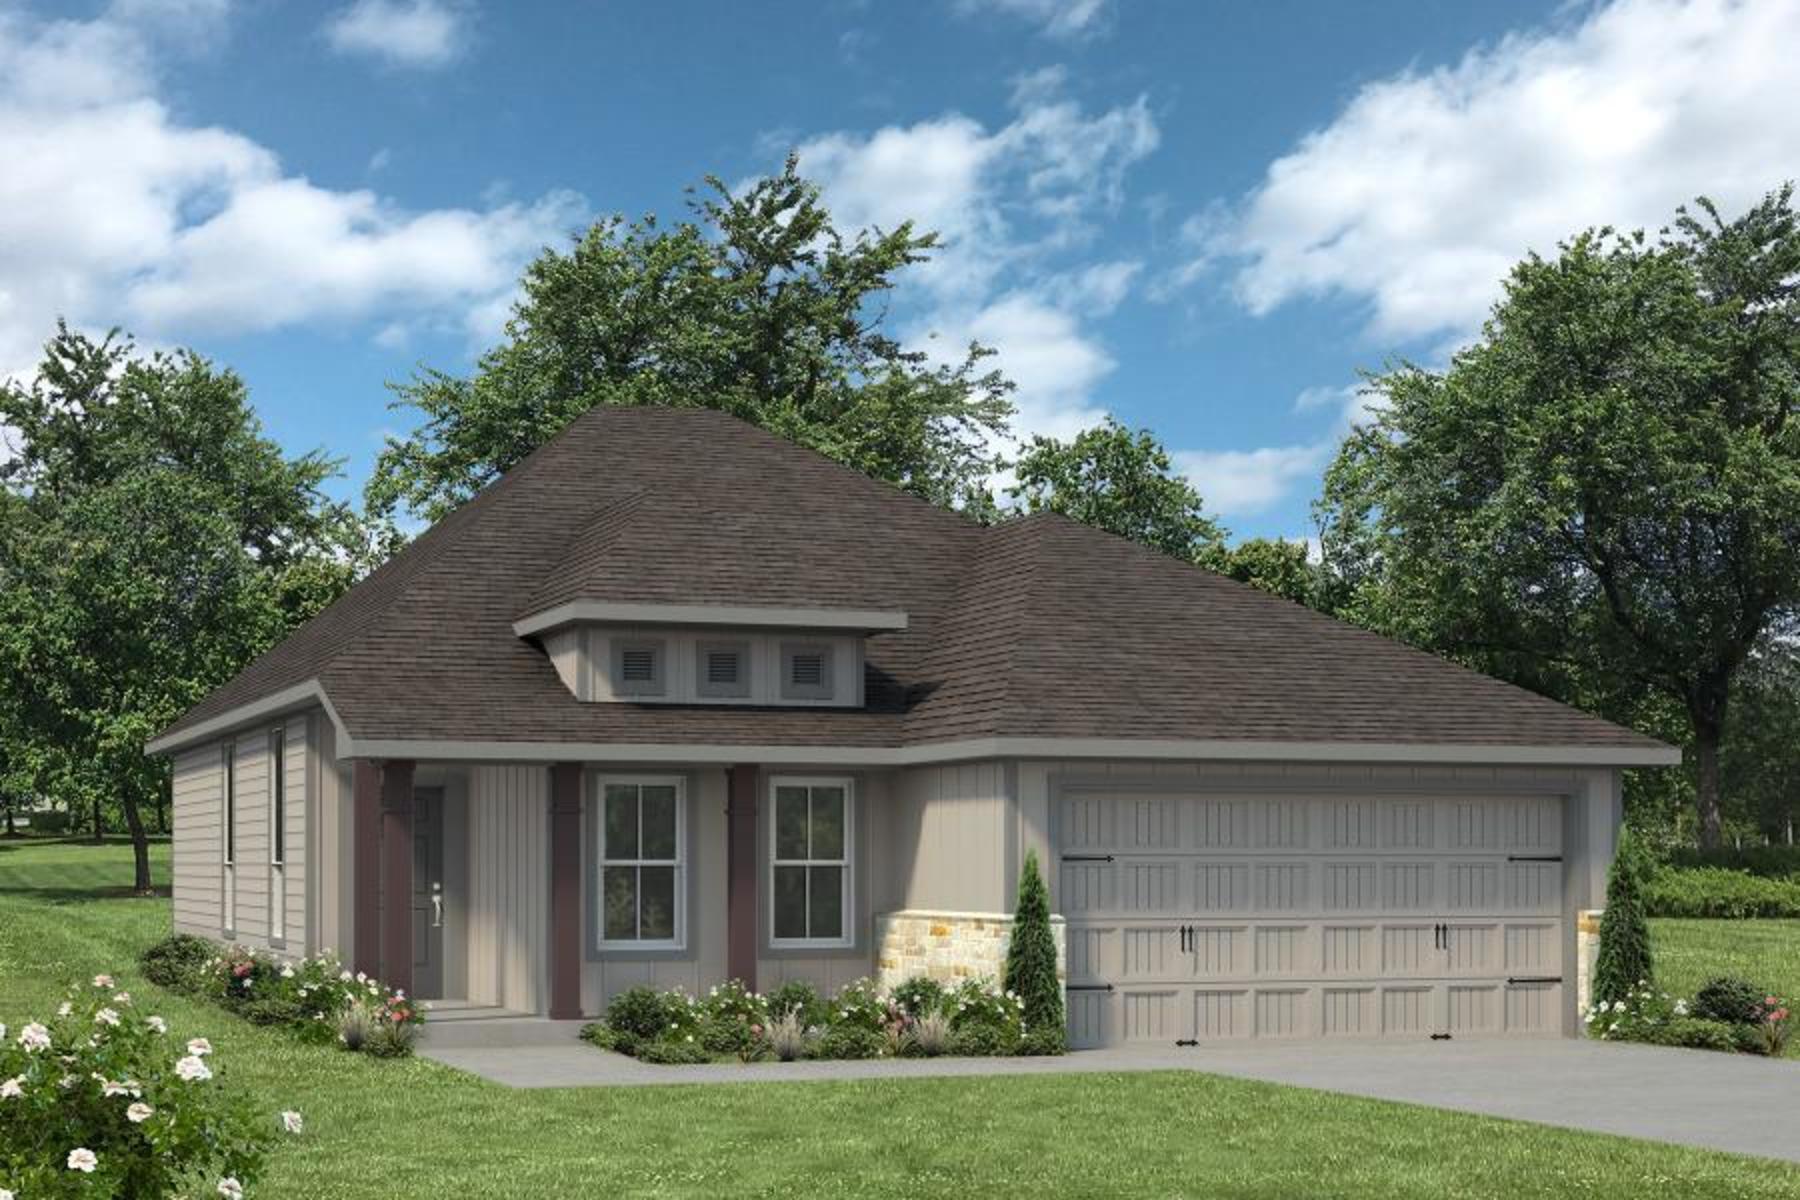 https://myhome.anewgo.com/client/stylecraft/community/Our%20Plans/plans. 1,514sf New Home